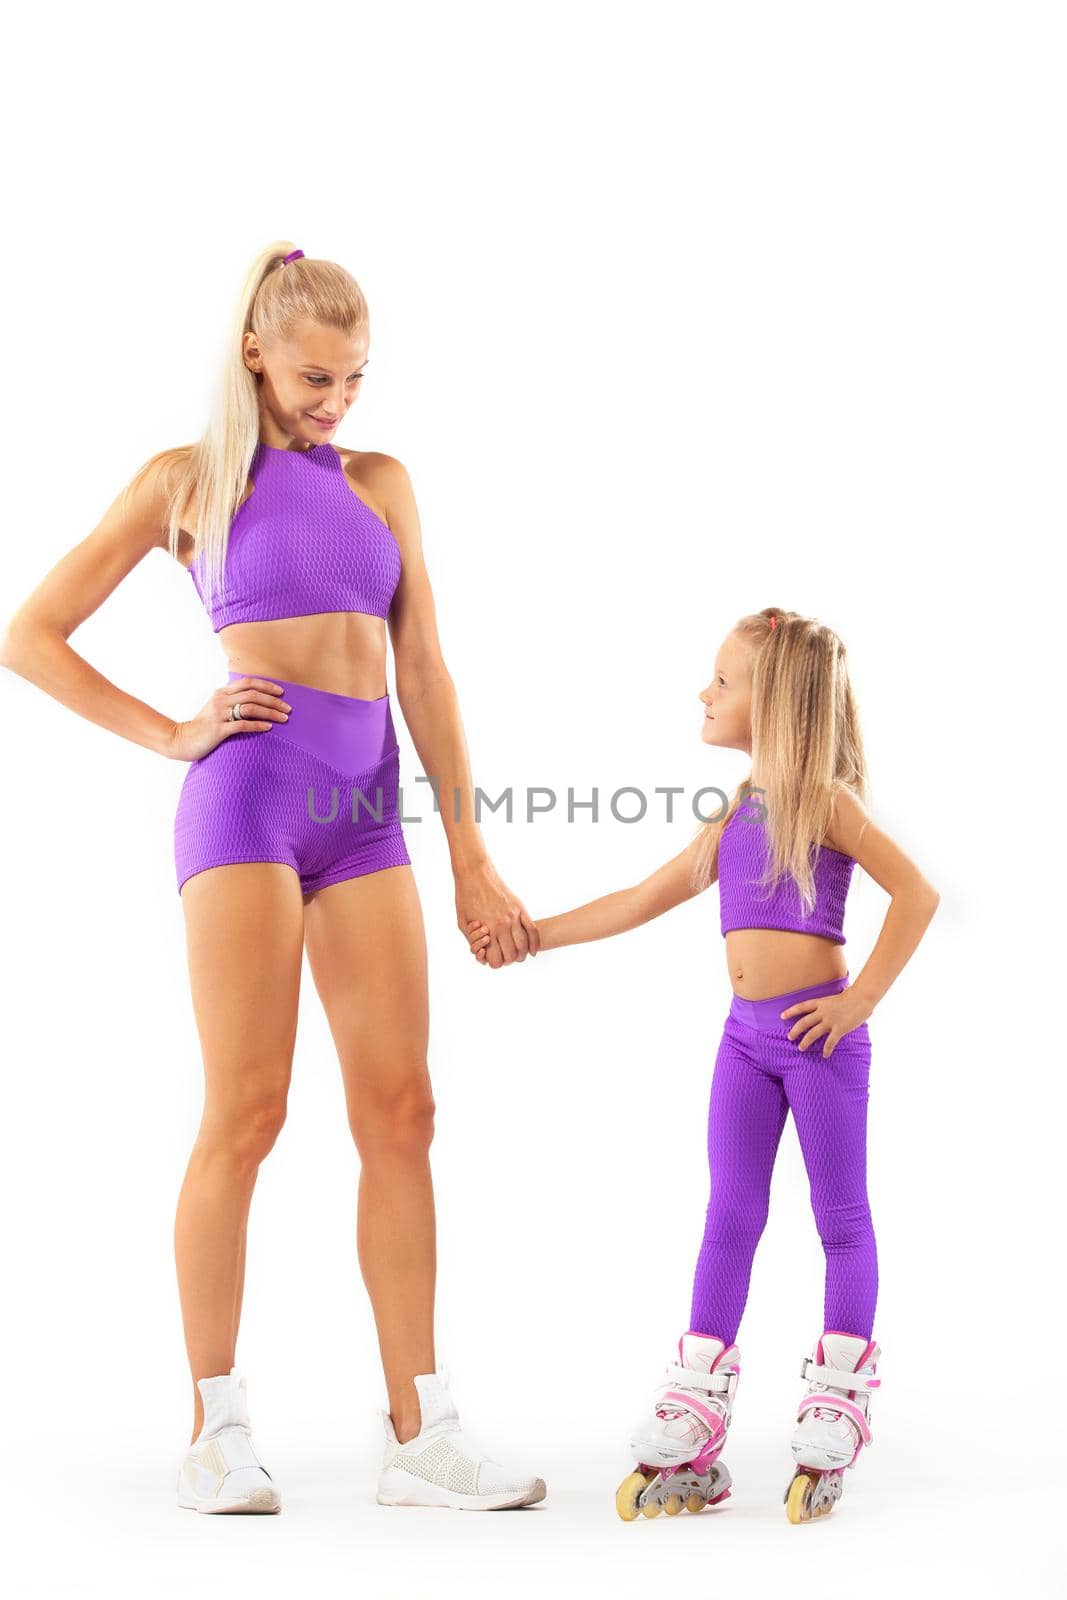 Family, mother and daughter, posing in studio wearing inline rollerskates by MikeOrlov